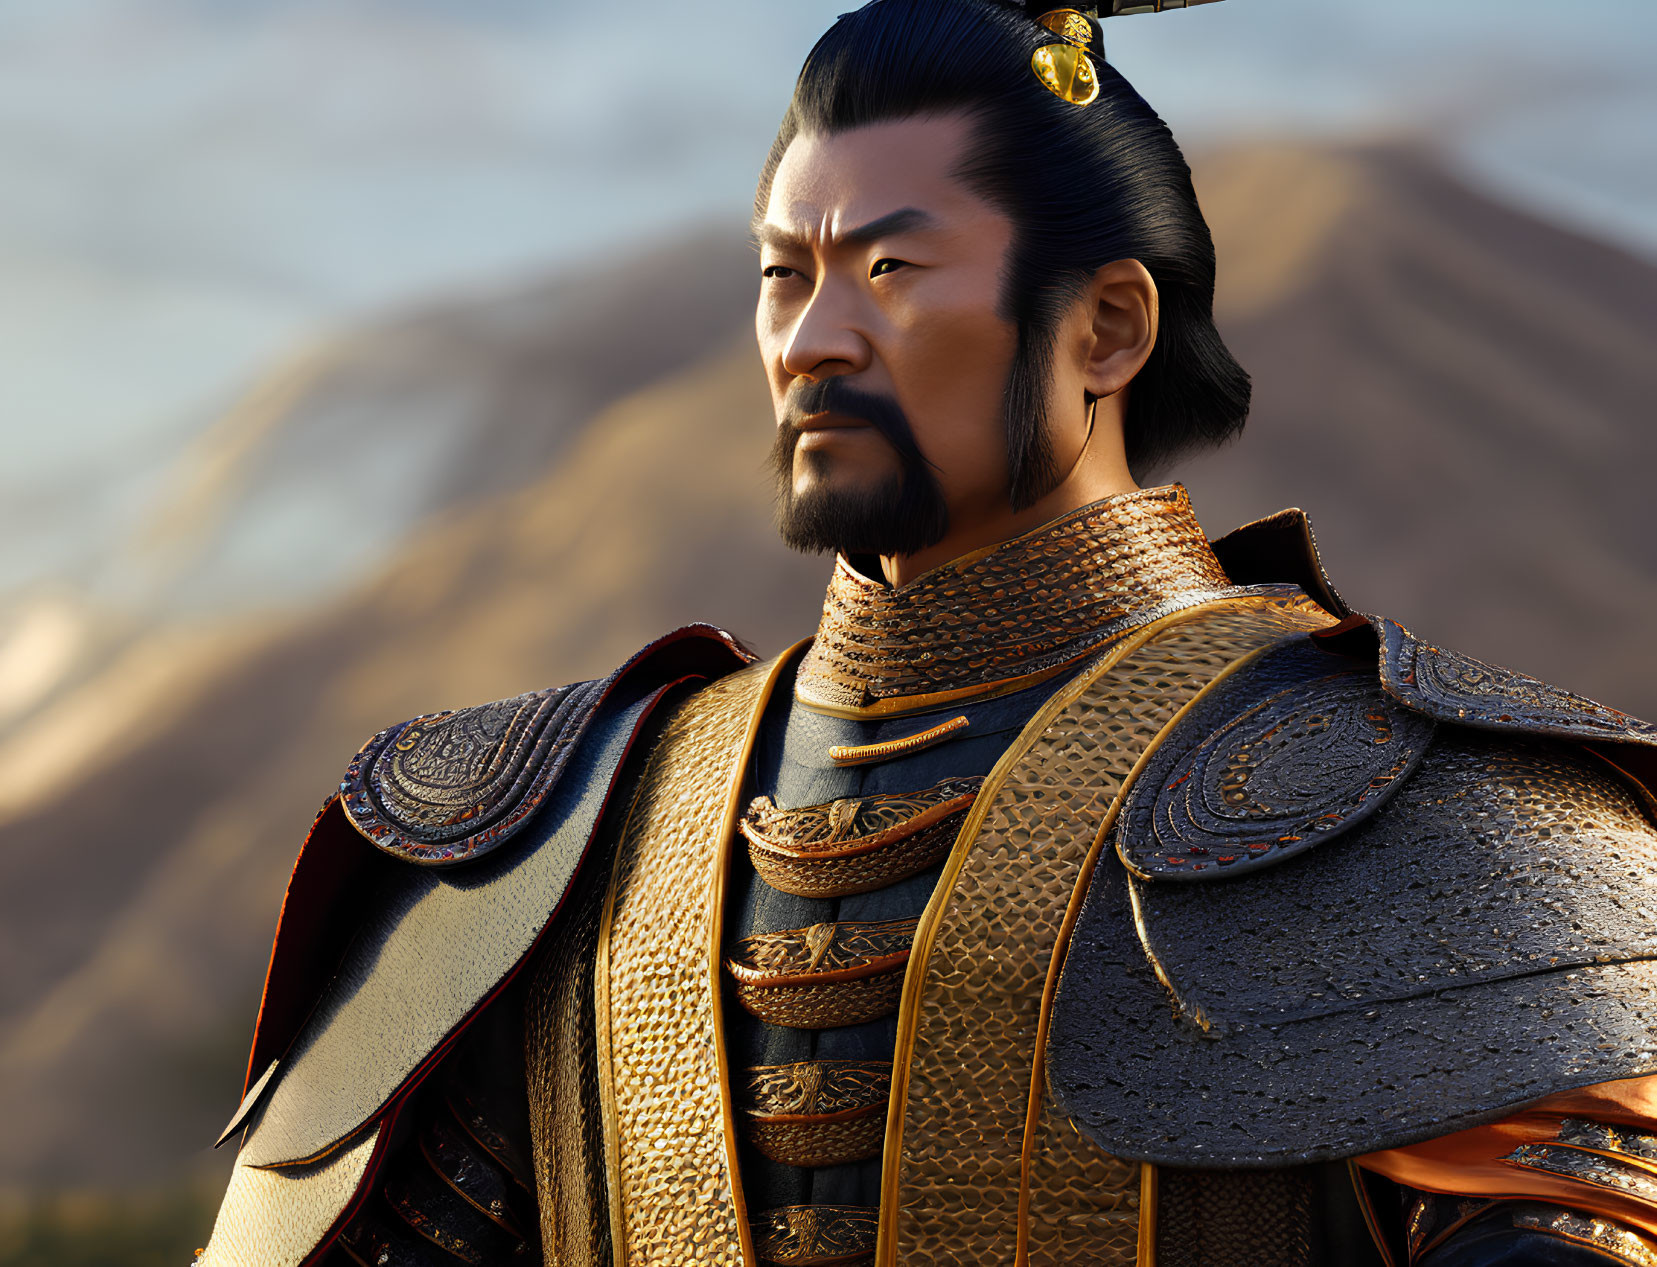 East Asian warrior in traditional armor with gold accents against mountain backdrop